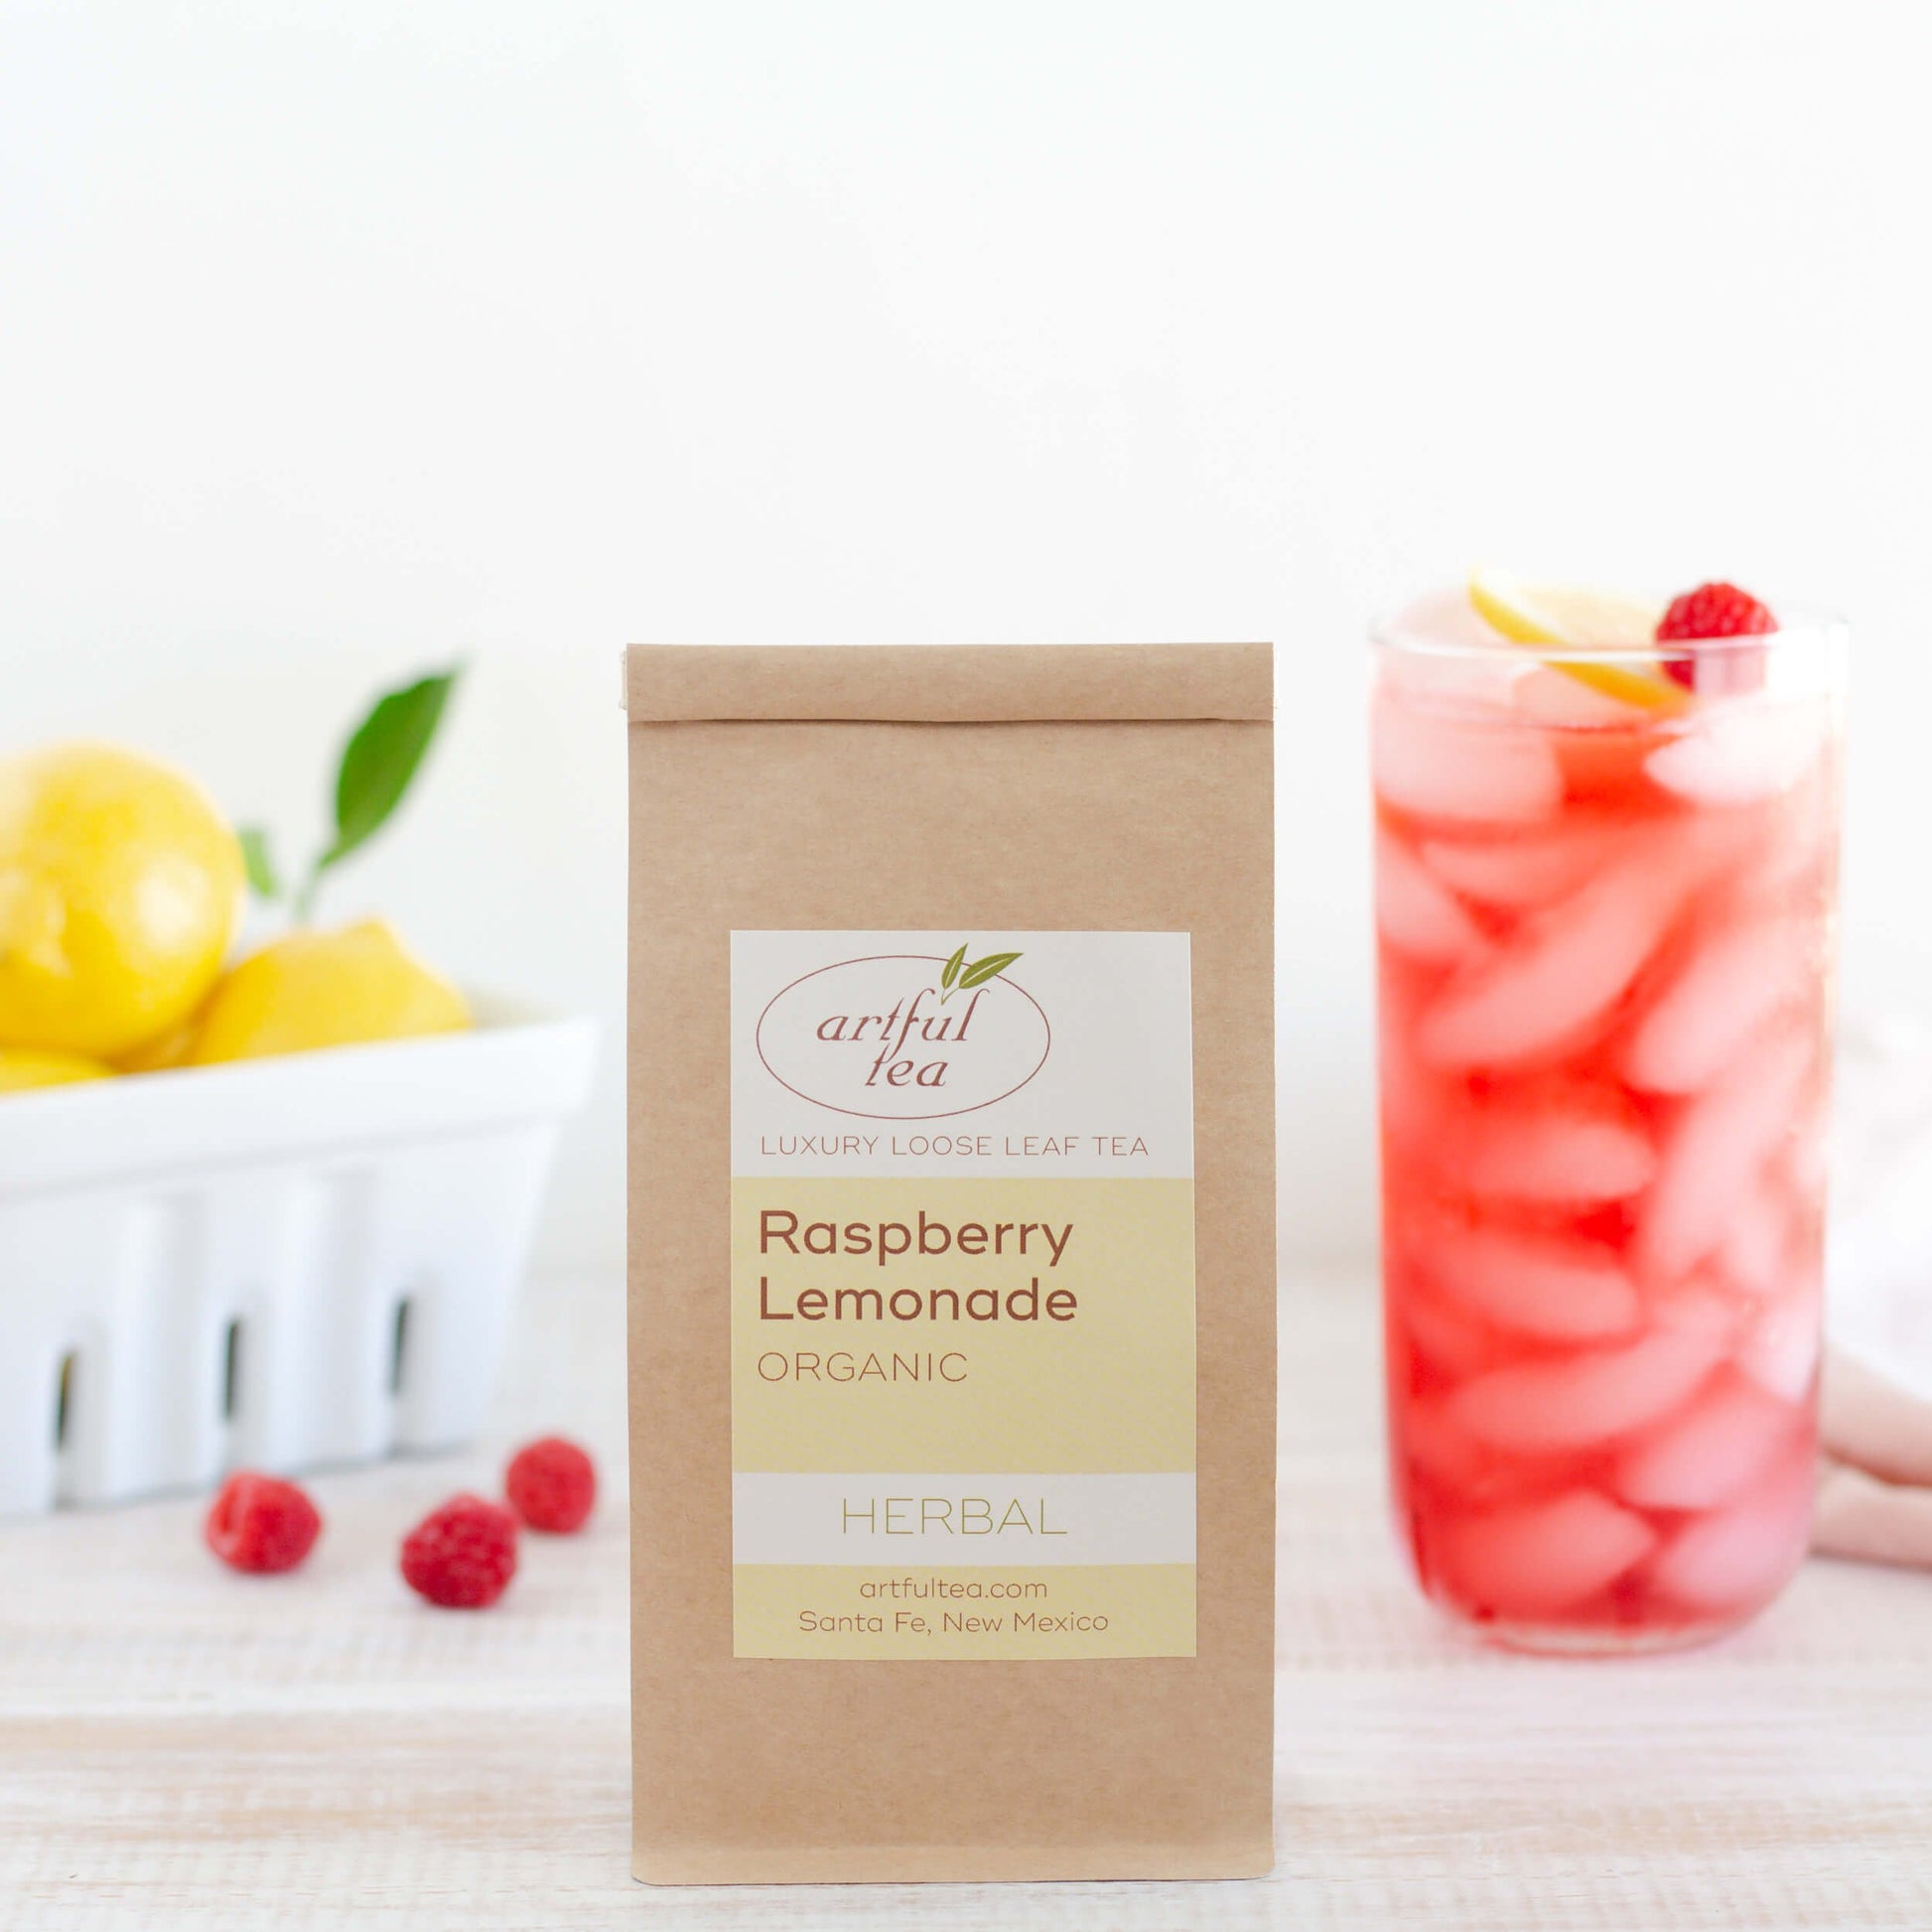 Raspberry Lemonade Organic Herbal Tea shown packaged in a kraft bag. A tall glass of iced tea and a container of lemons are in the background, with three raspberries scattered nearby